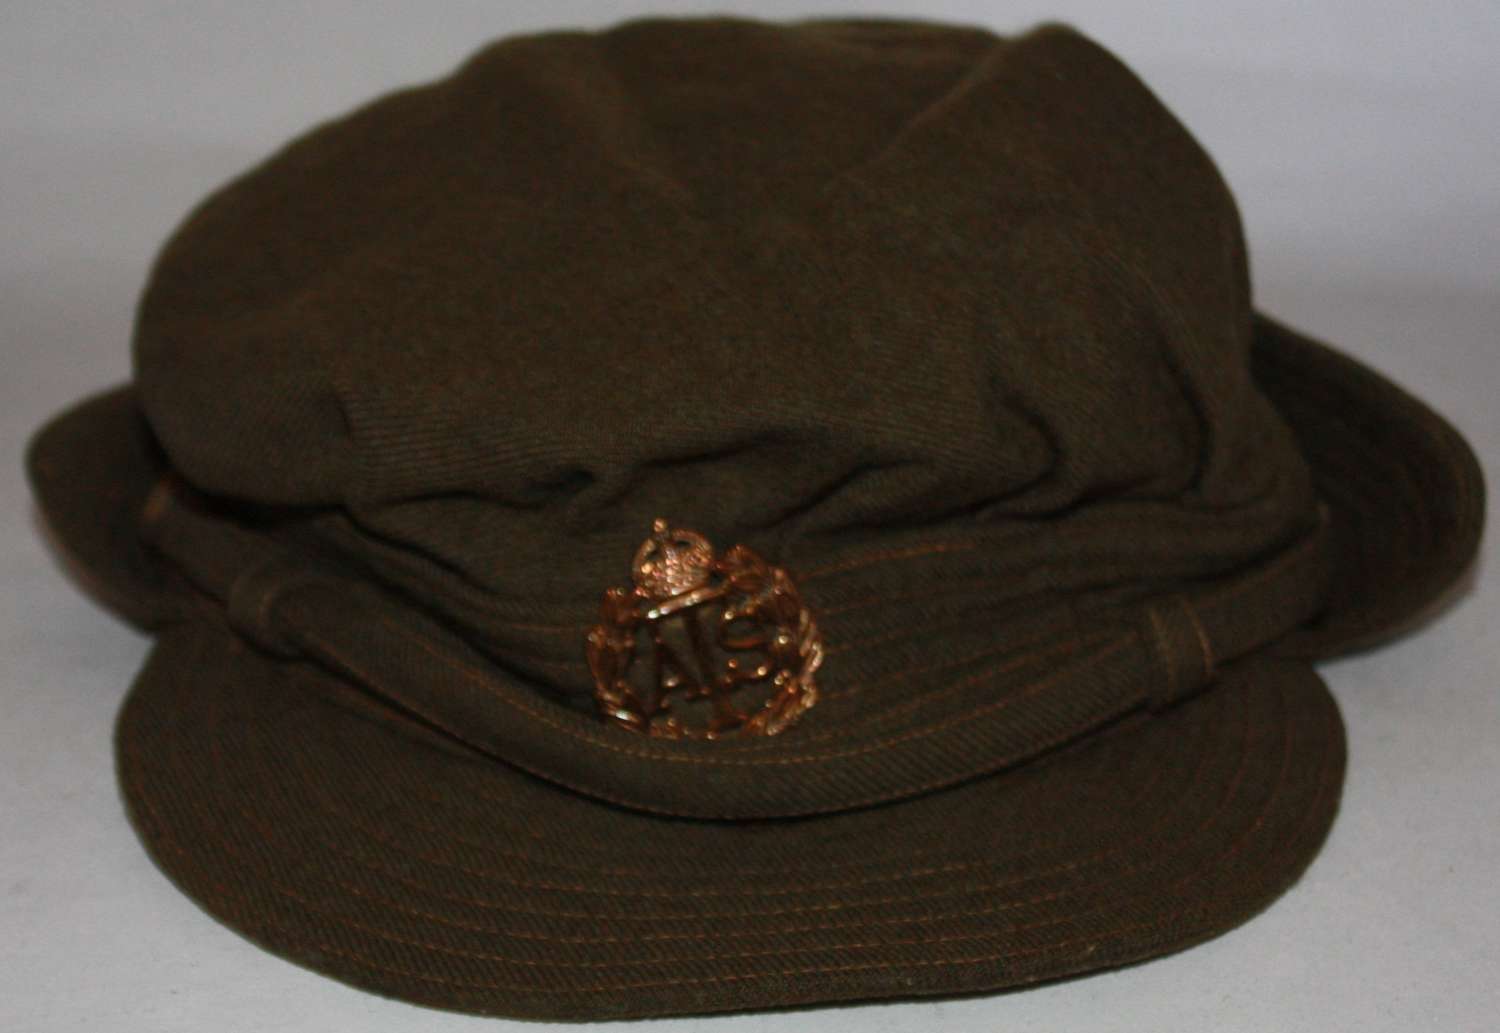 A GOOD EARLY PATTERN ATS OTHER RANKS / OFFICERS PEAKED CAP